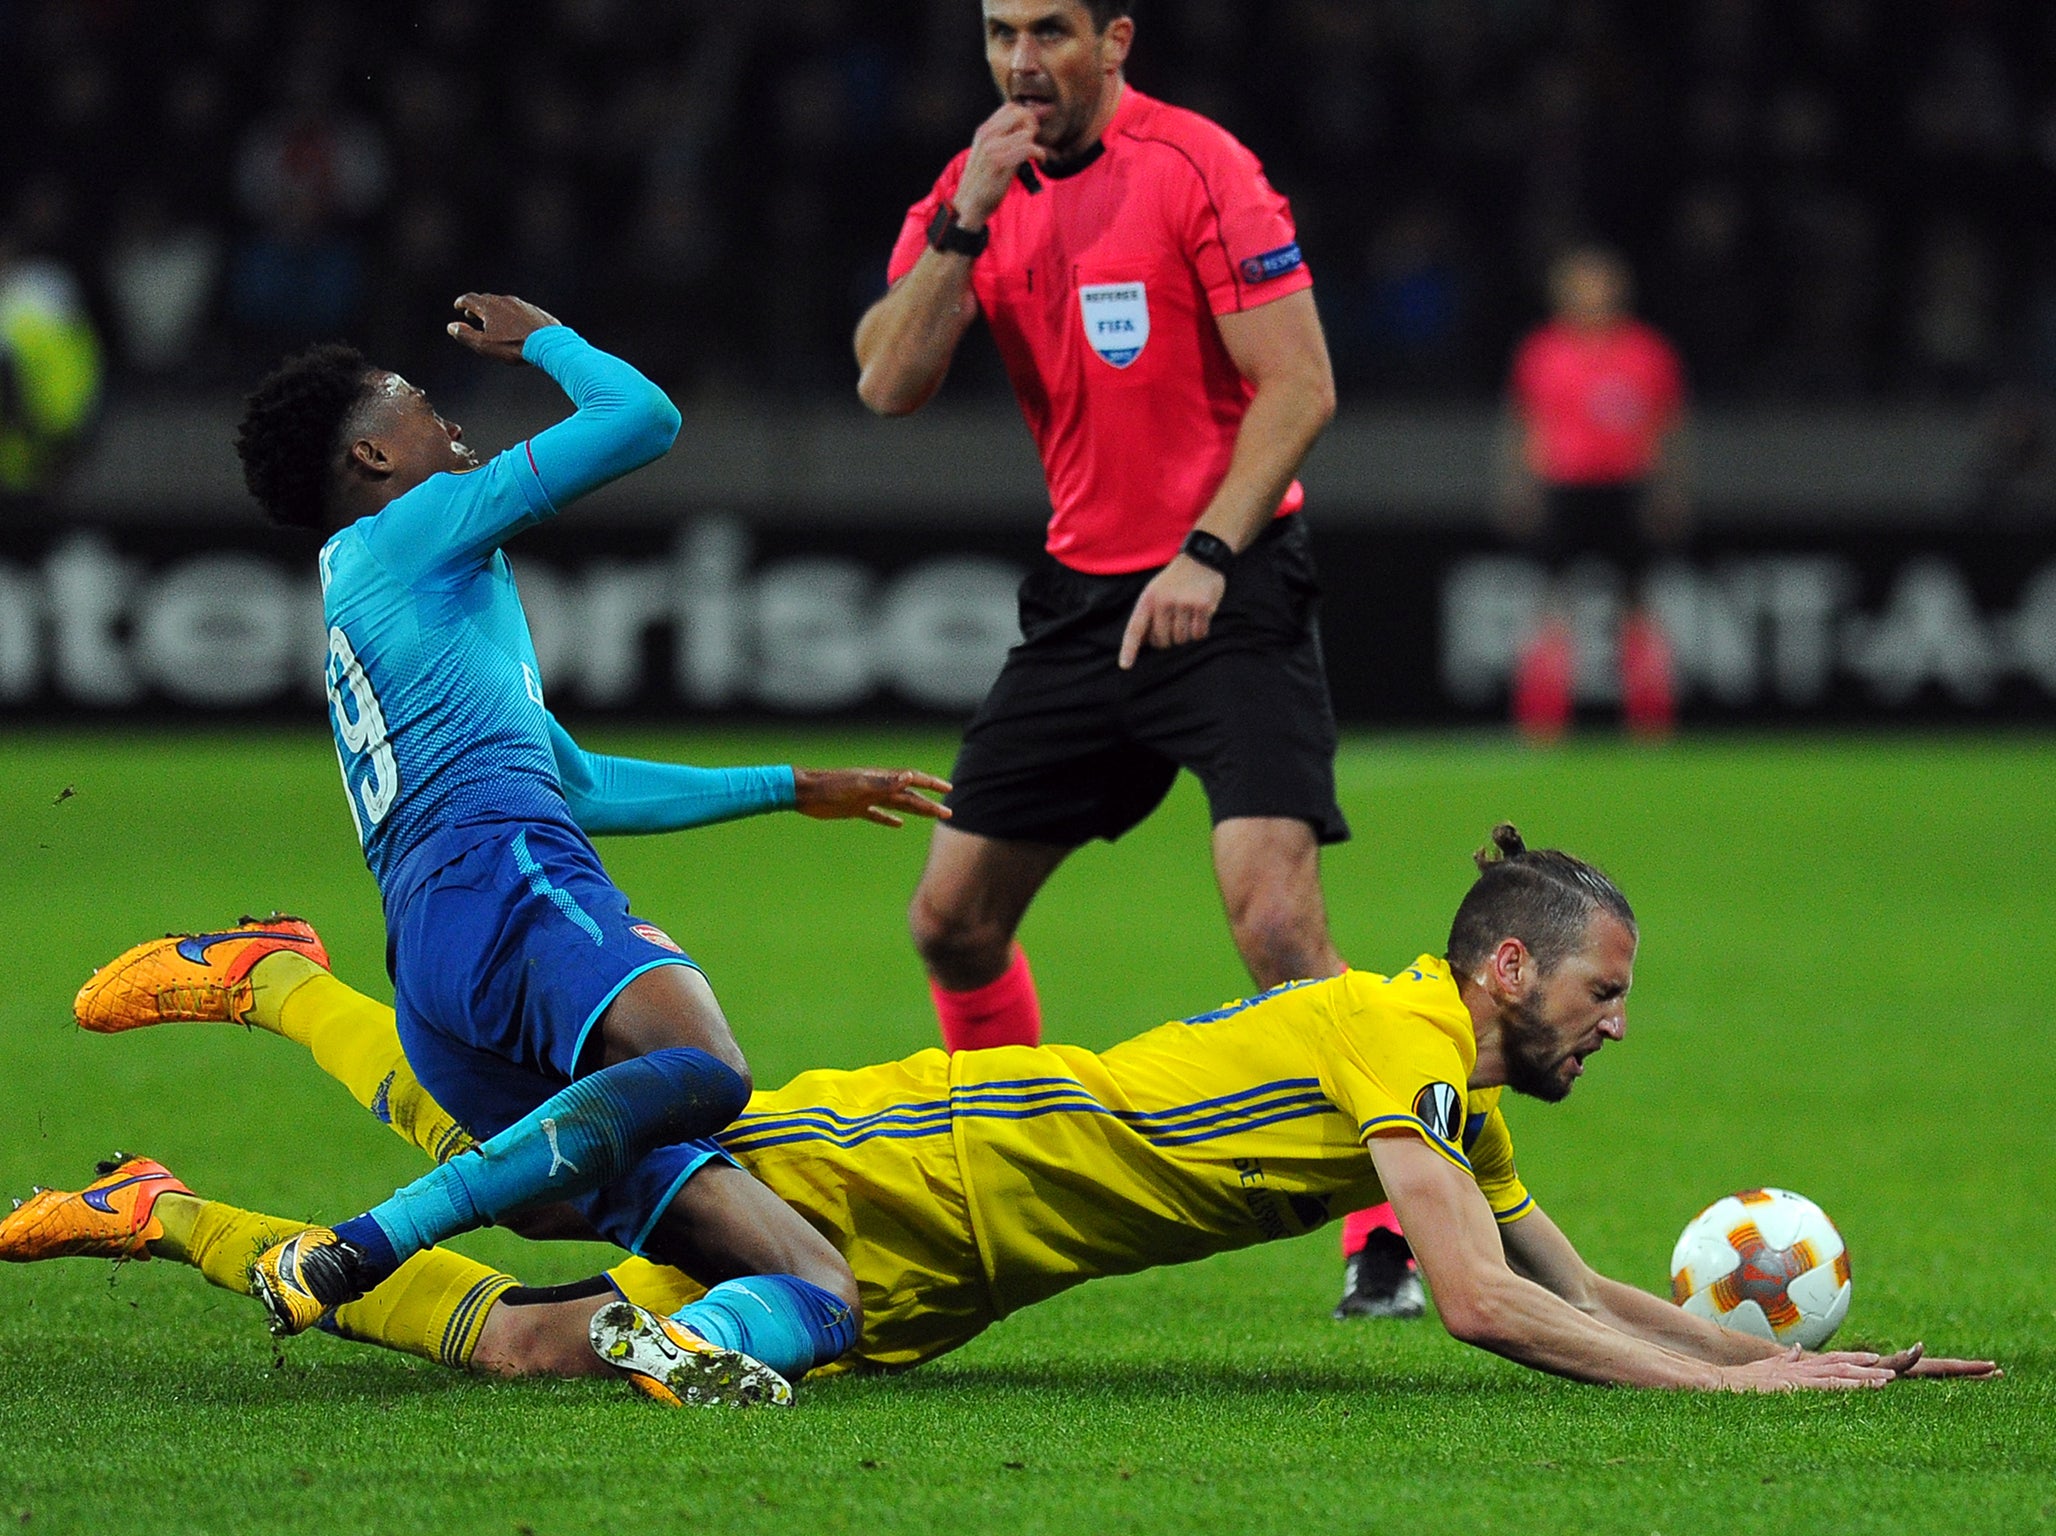 BATE didn't make life easy for Arsenal